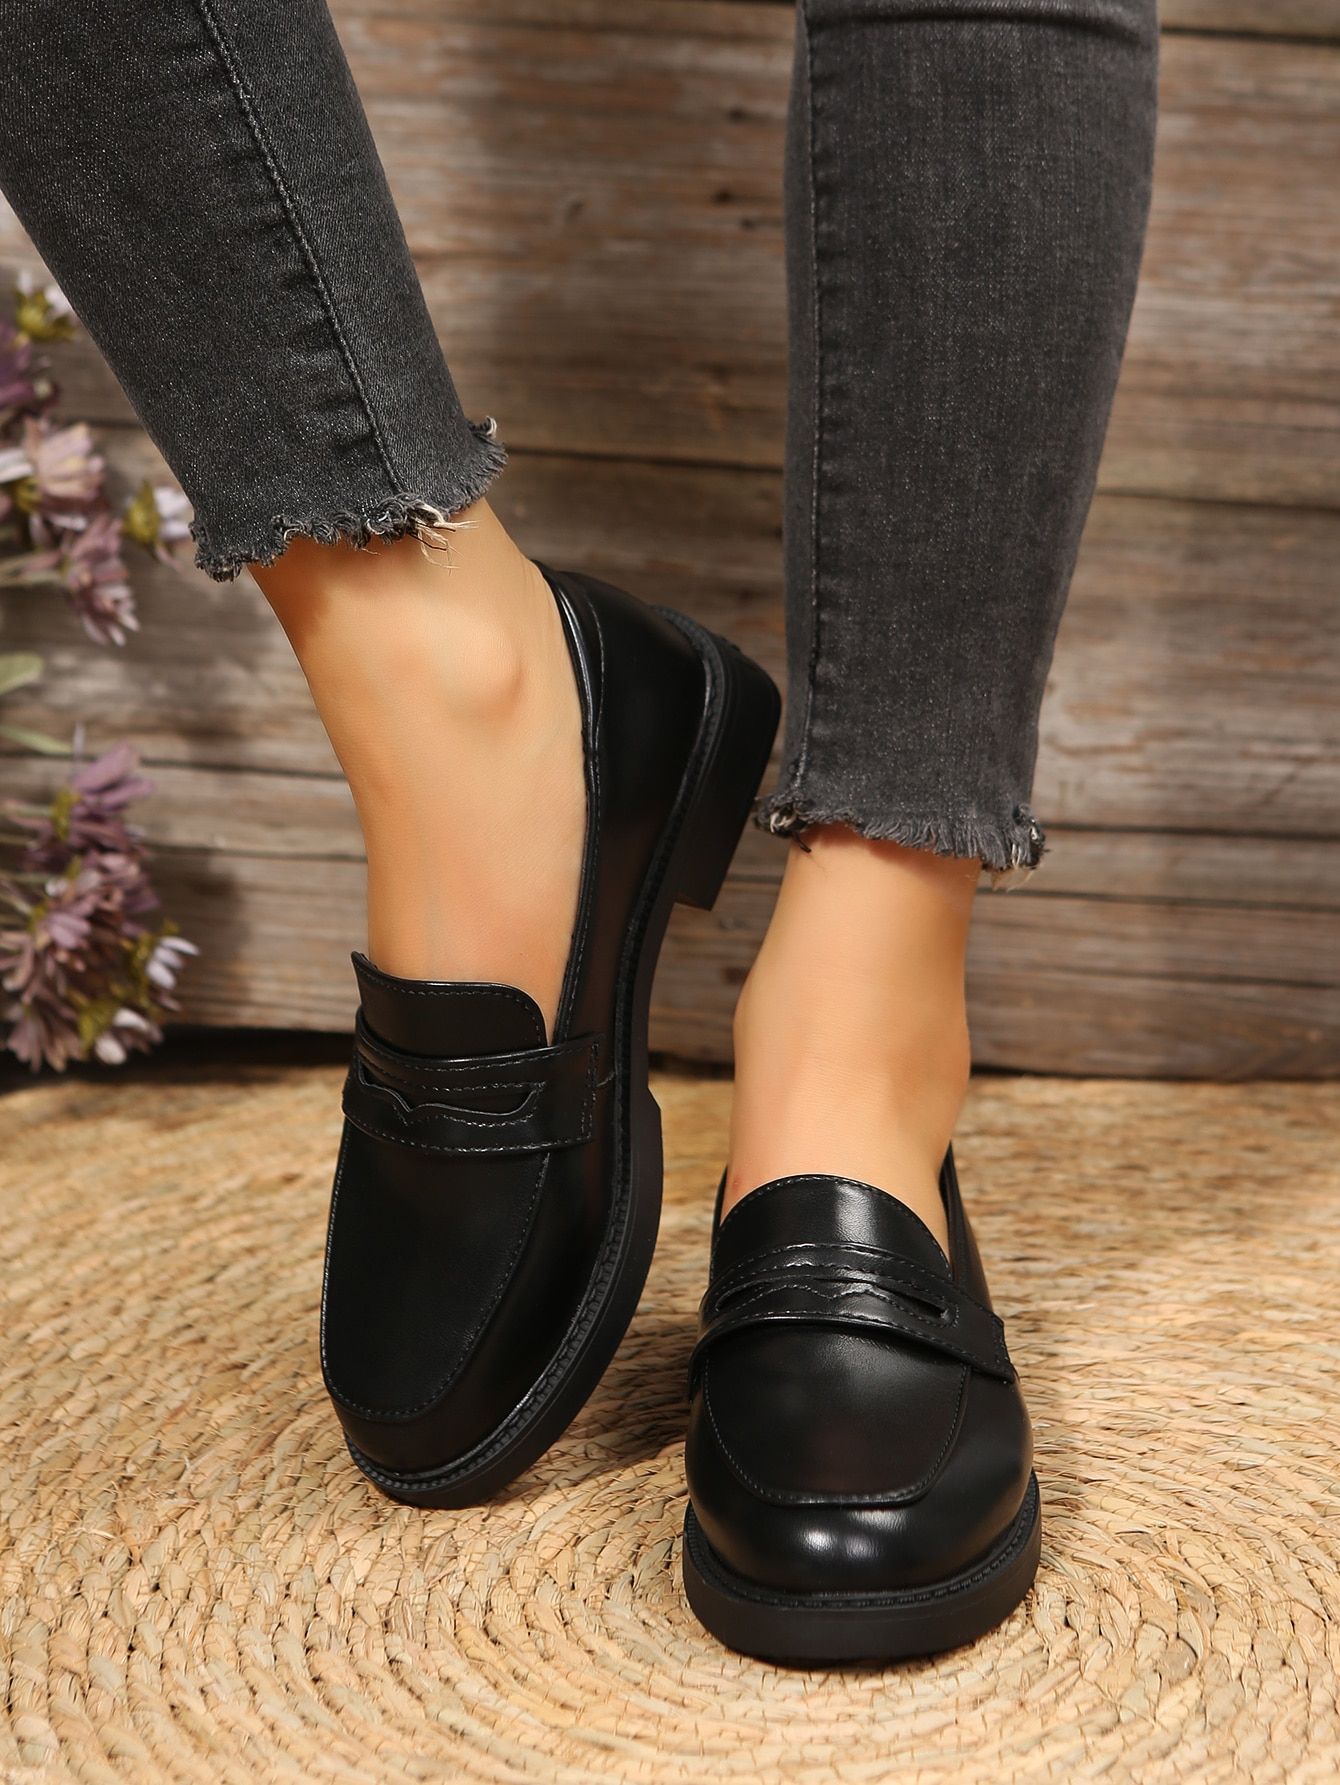 Black Loafers for Women